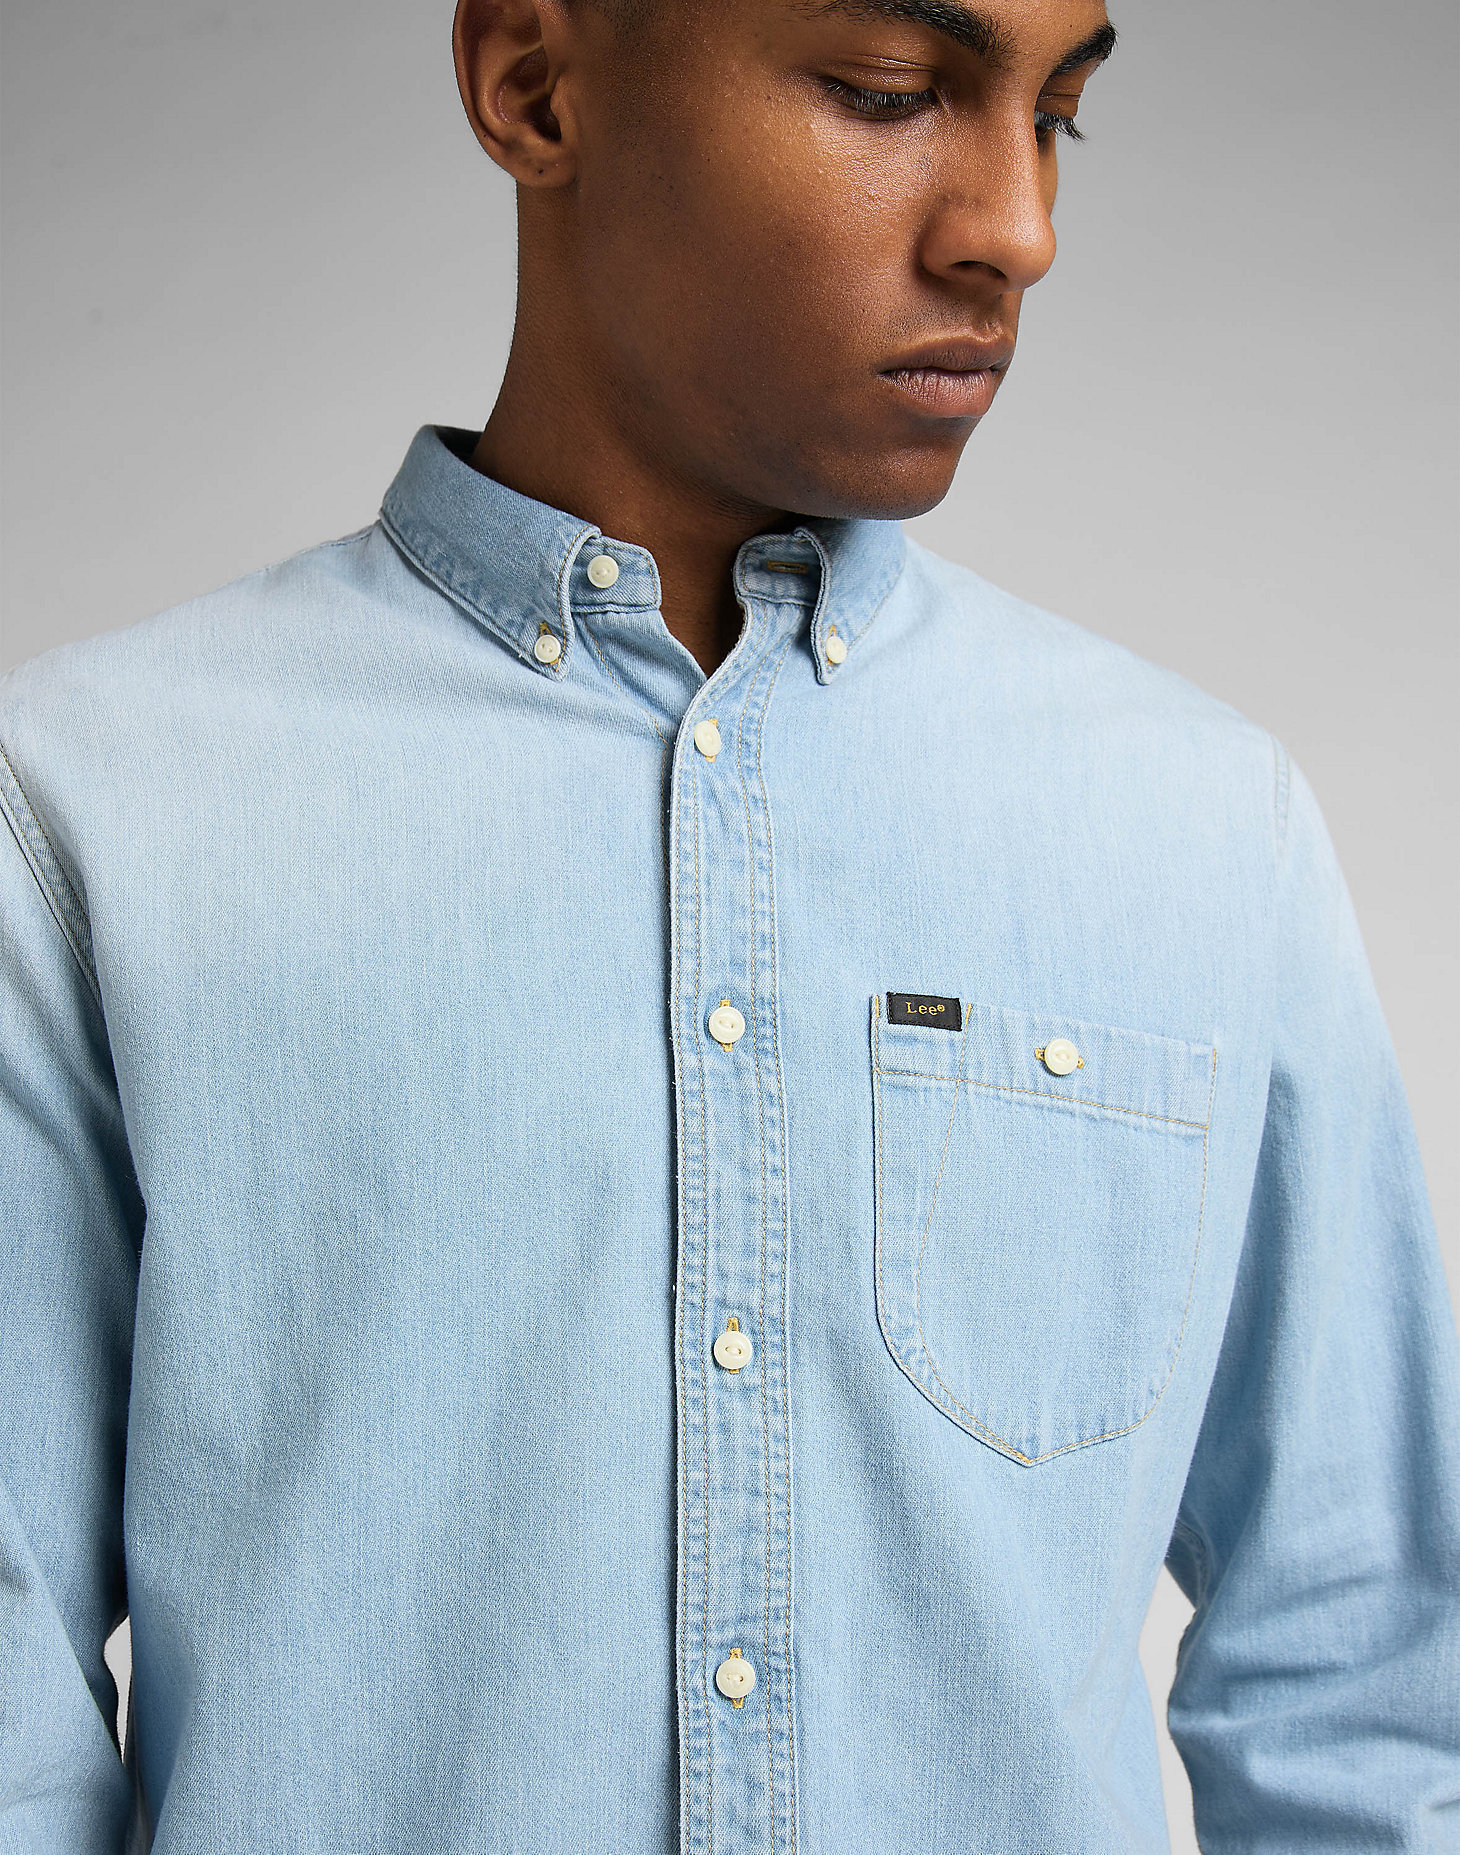 Riveted Shirt in Space Blue alternative view 4